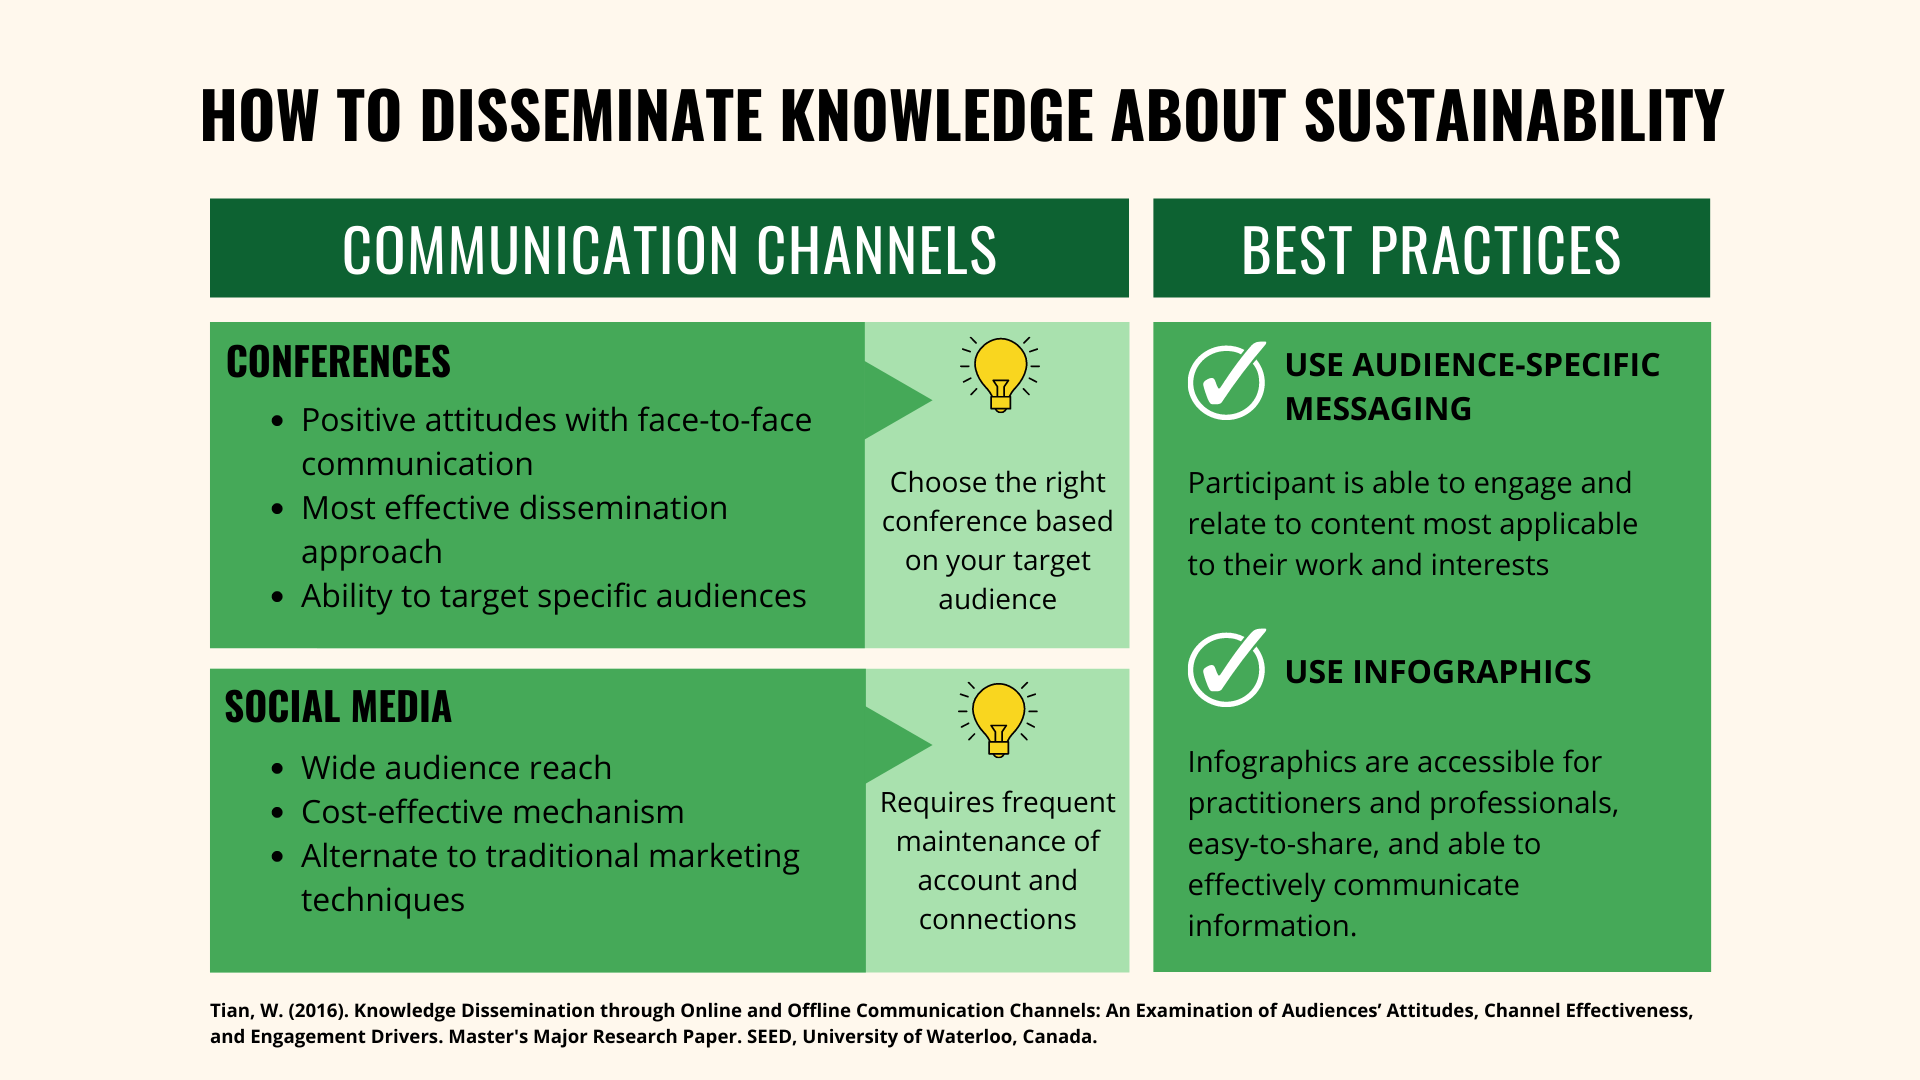 How to Disseminate Knowledge About Sustainability